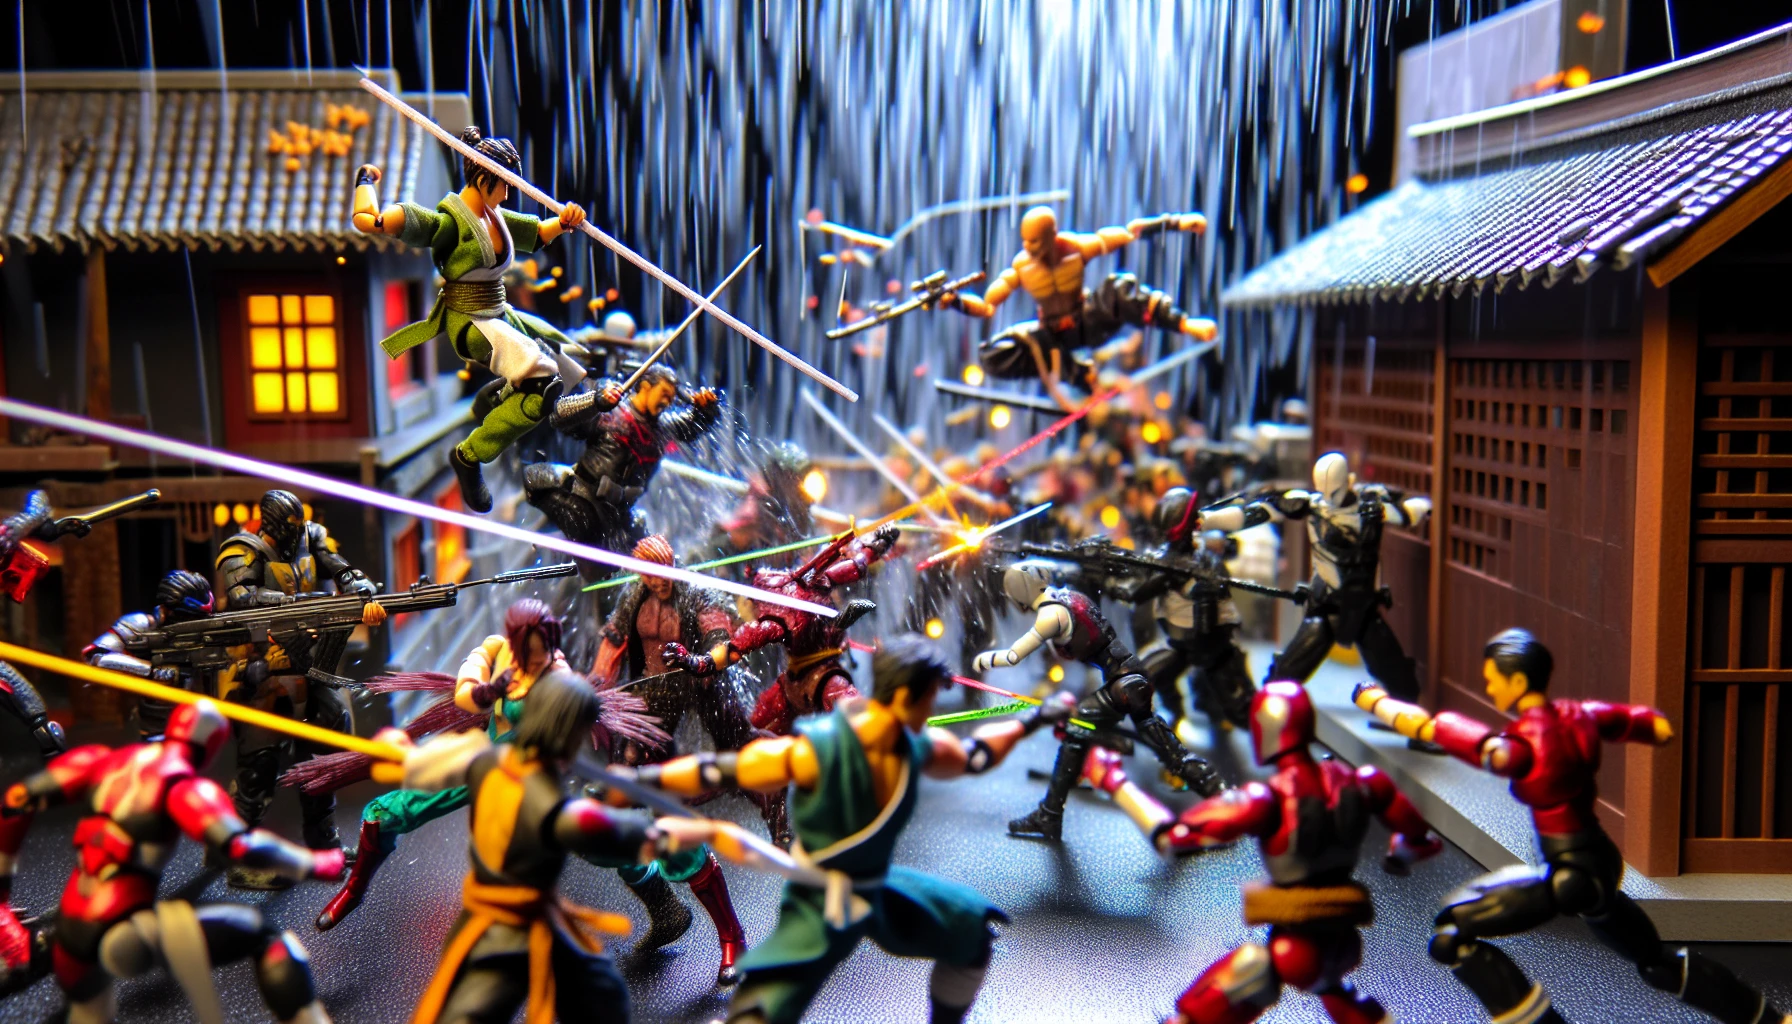 Enhancing action figure photography with special effects like smoke and rain